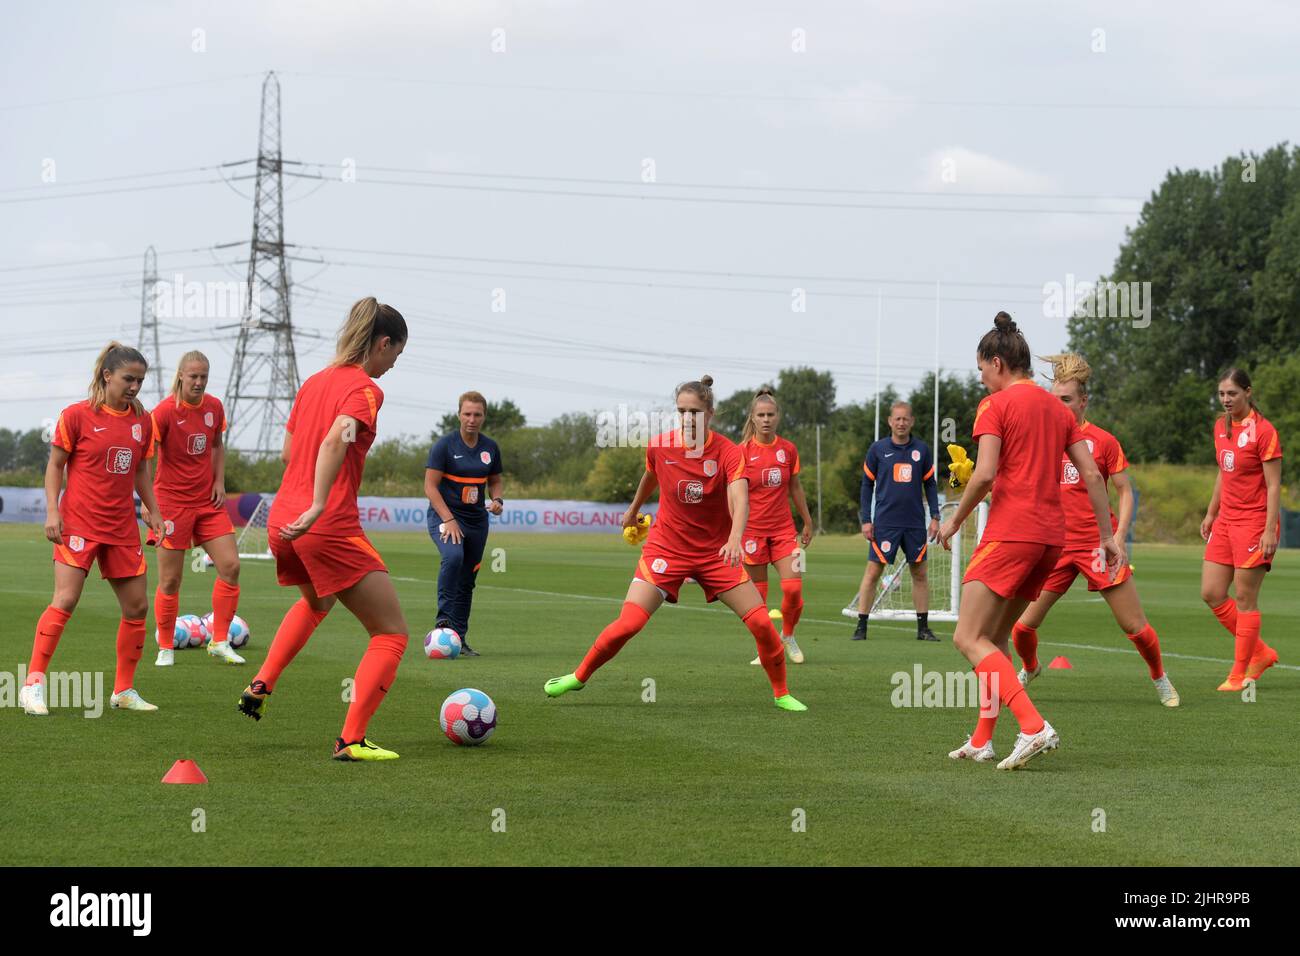 STOCKPORT - Vivianne Miedema of Holland women at center during a rondo during a training session for the Netherlands women's national team on July 20, 2022 at Stockport County FC in Stockport ahead of the UEFA Women's EURO England 2022 game against France. ANP GERRIT VAN COLOGNE Stock Photo